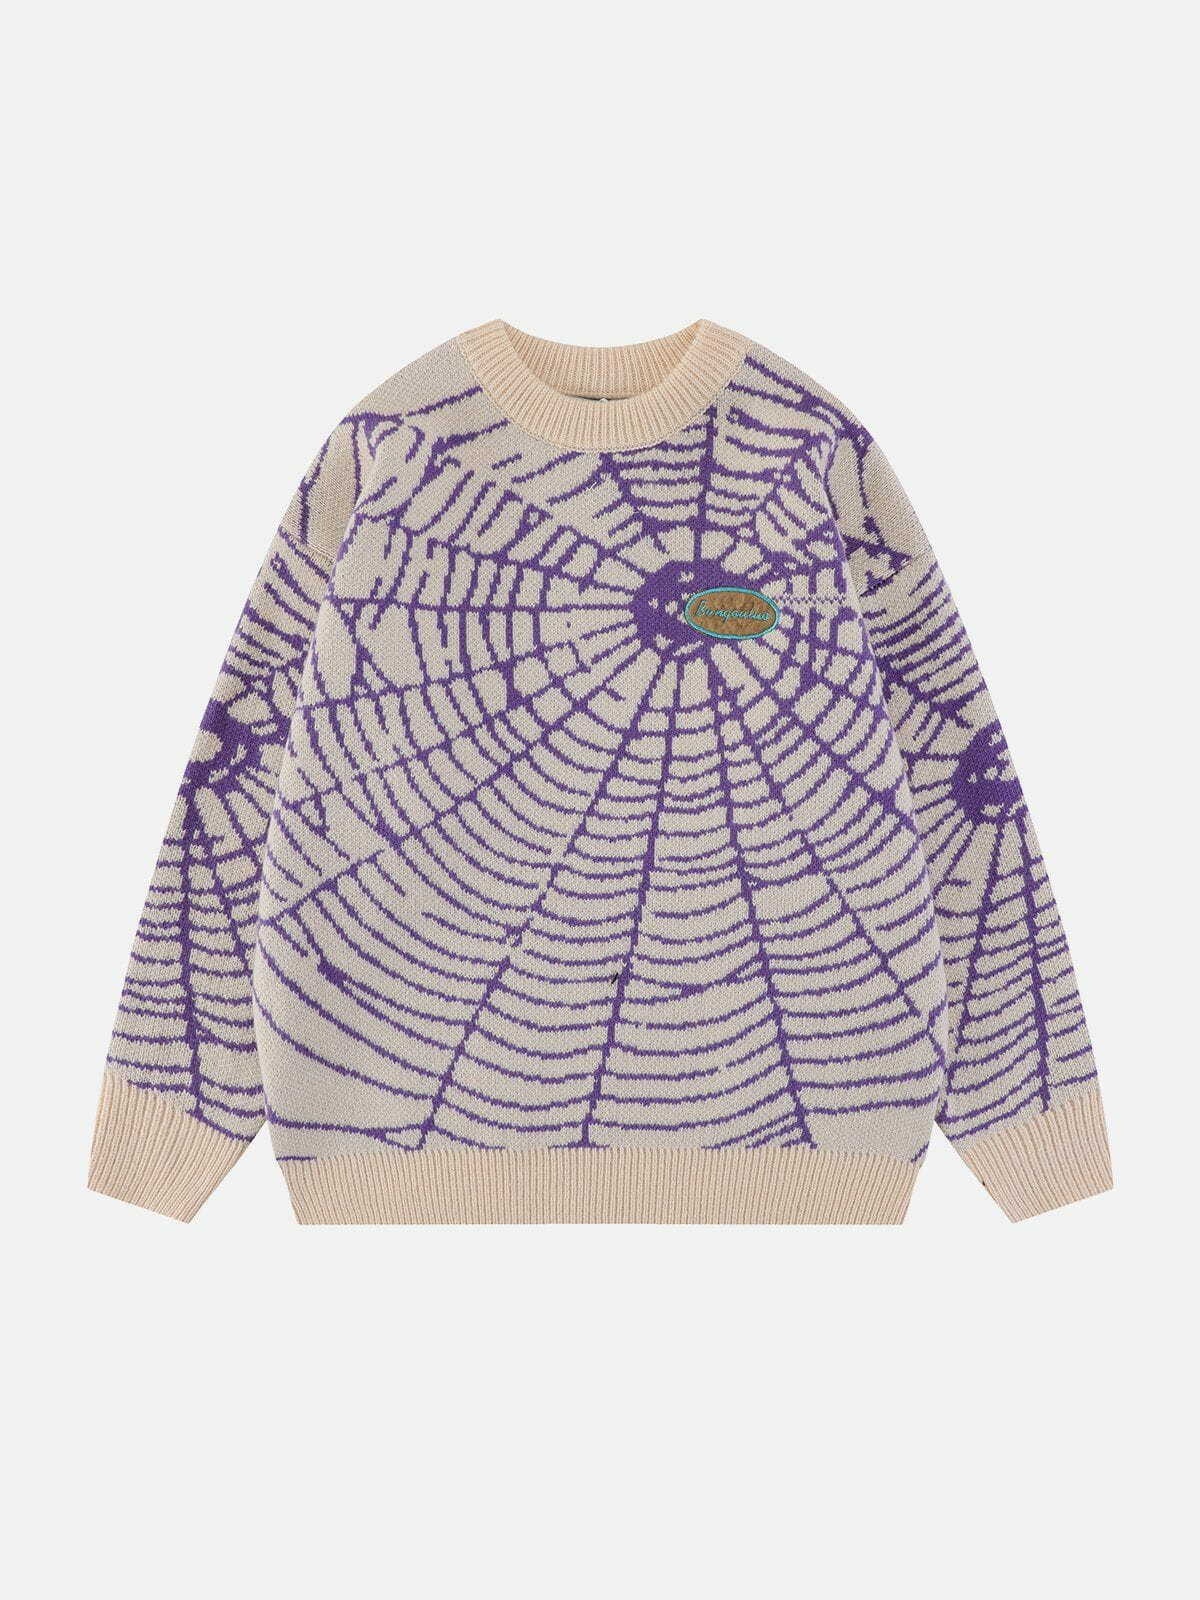 knit spider web sweater edgy streetwear chic 1851